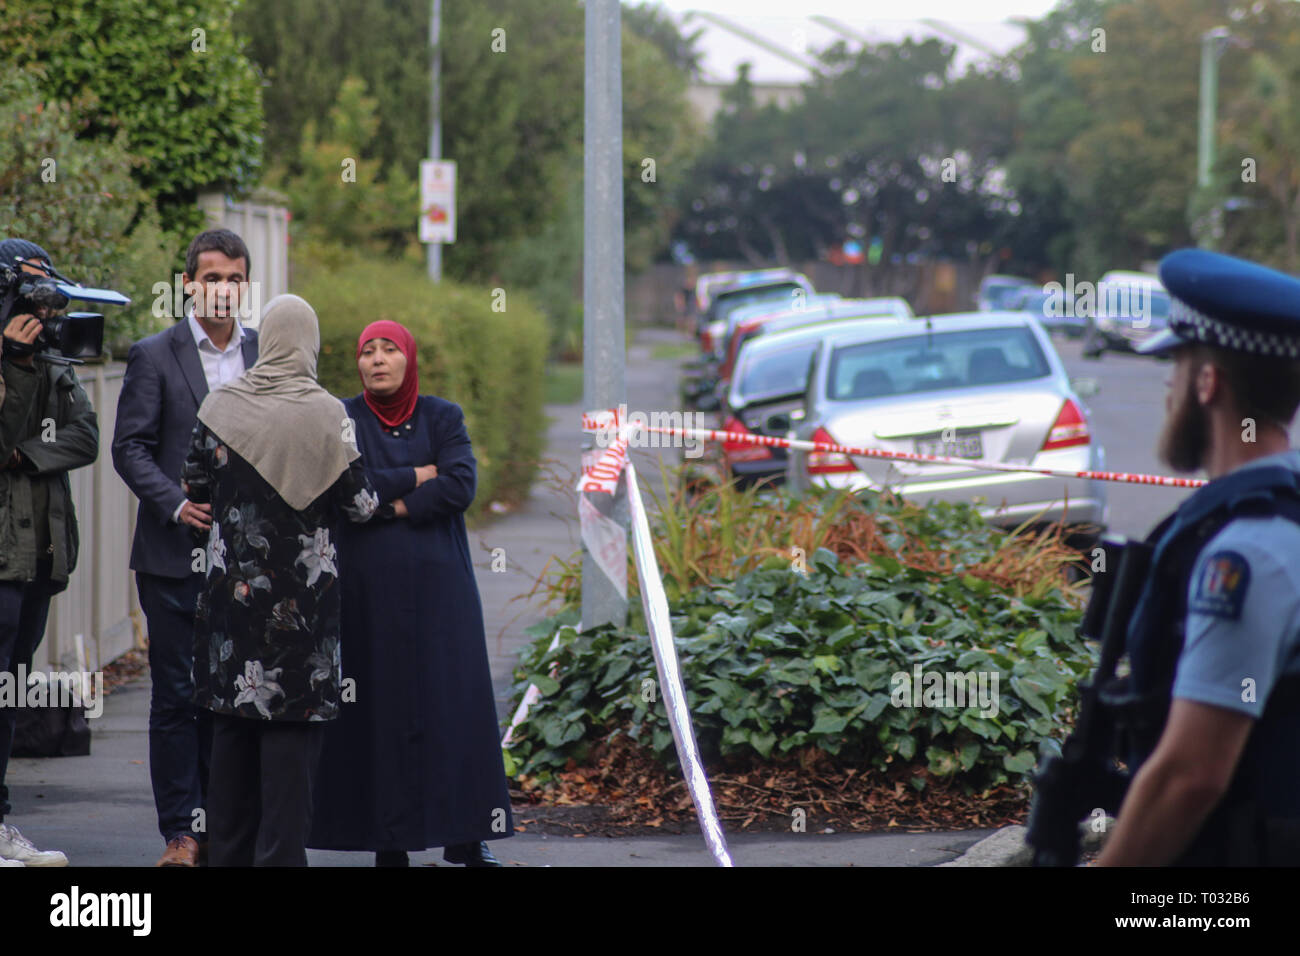 Christchurch, New Zealand. 16th March 2019. Women seen talking to media about the Christchurch mosques shooting. Around 50 people has been reportedly killed in the Christchurch mosques terrorist attack shooting targeting the Masjid Al Noor Mosque and the Linwood Mosque. Credit: SOPA Images Limited/Alamy Live News Stock Photo